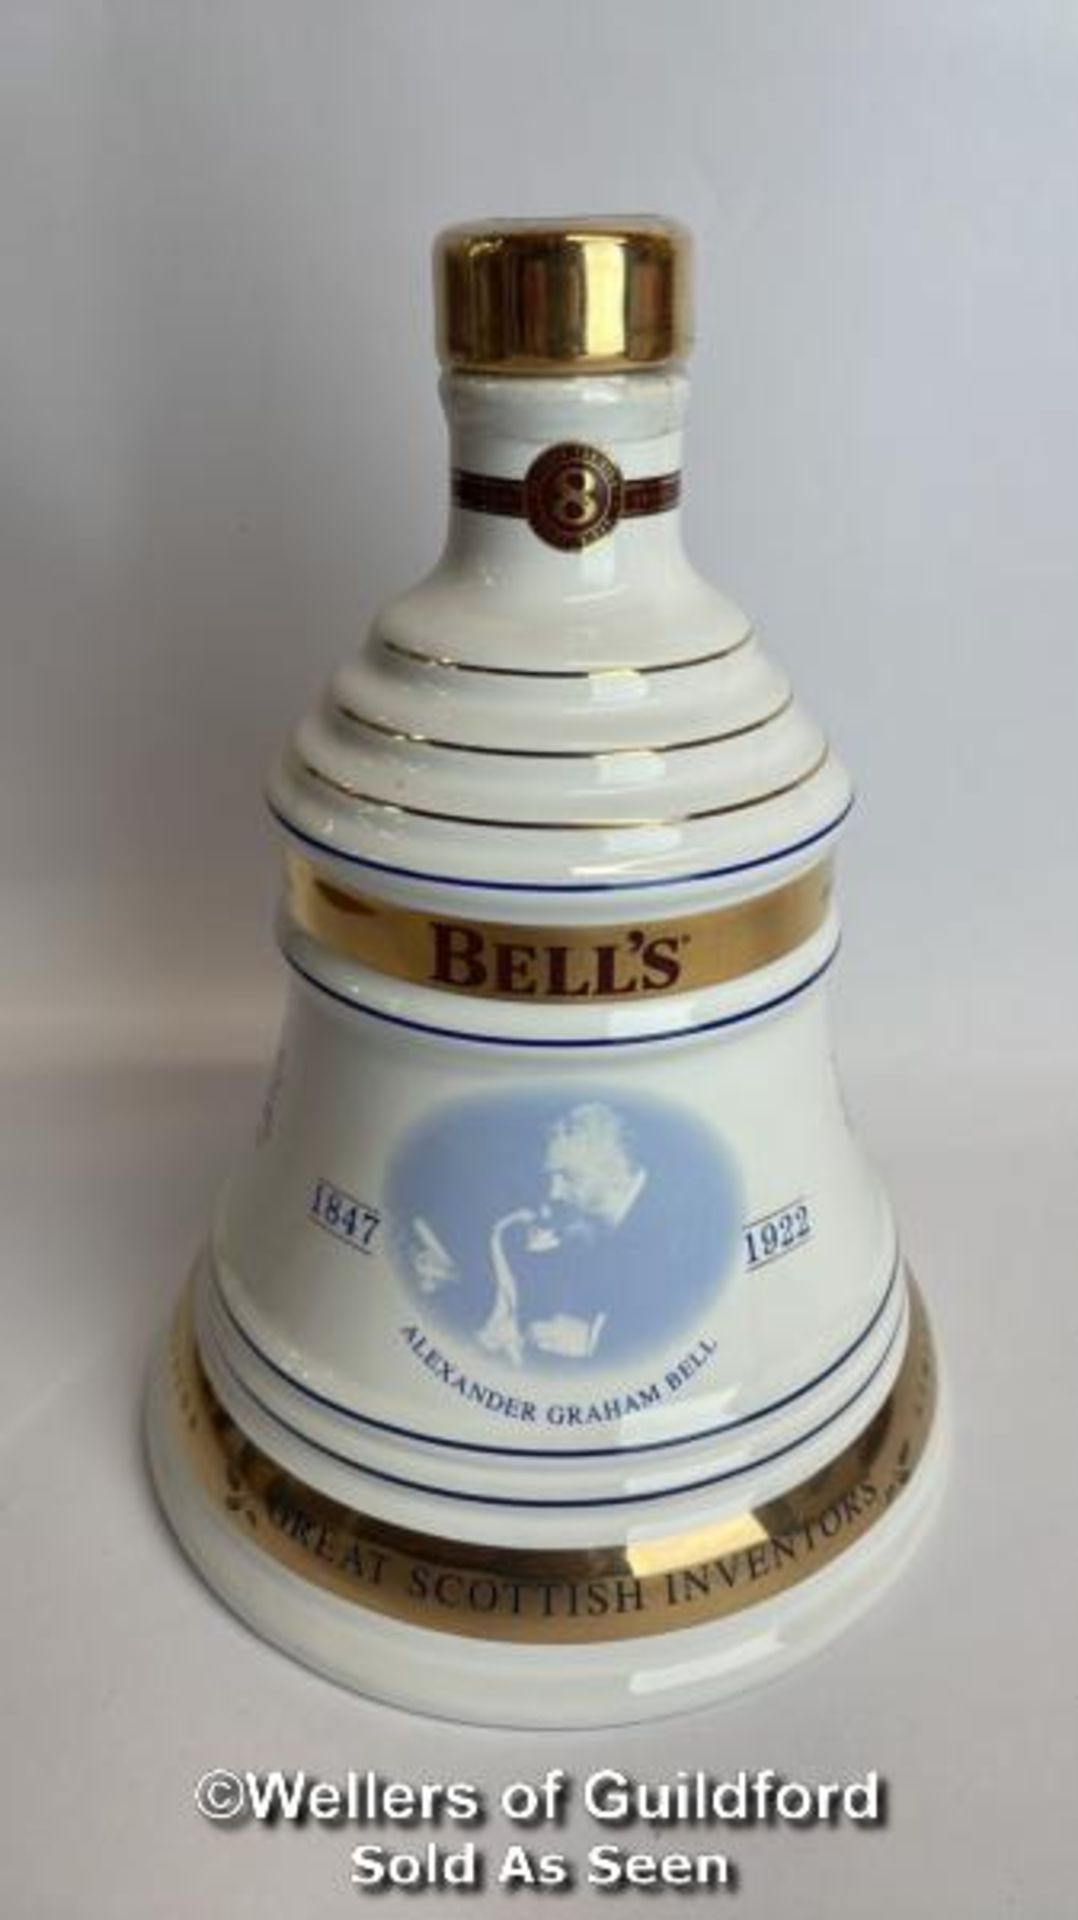 Bell's 2001 Old Scotch Whisky Limited Edition Christmas Decanter, Aged 8 Years, Brand New and Boxed, - Image 4 of 10